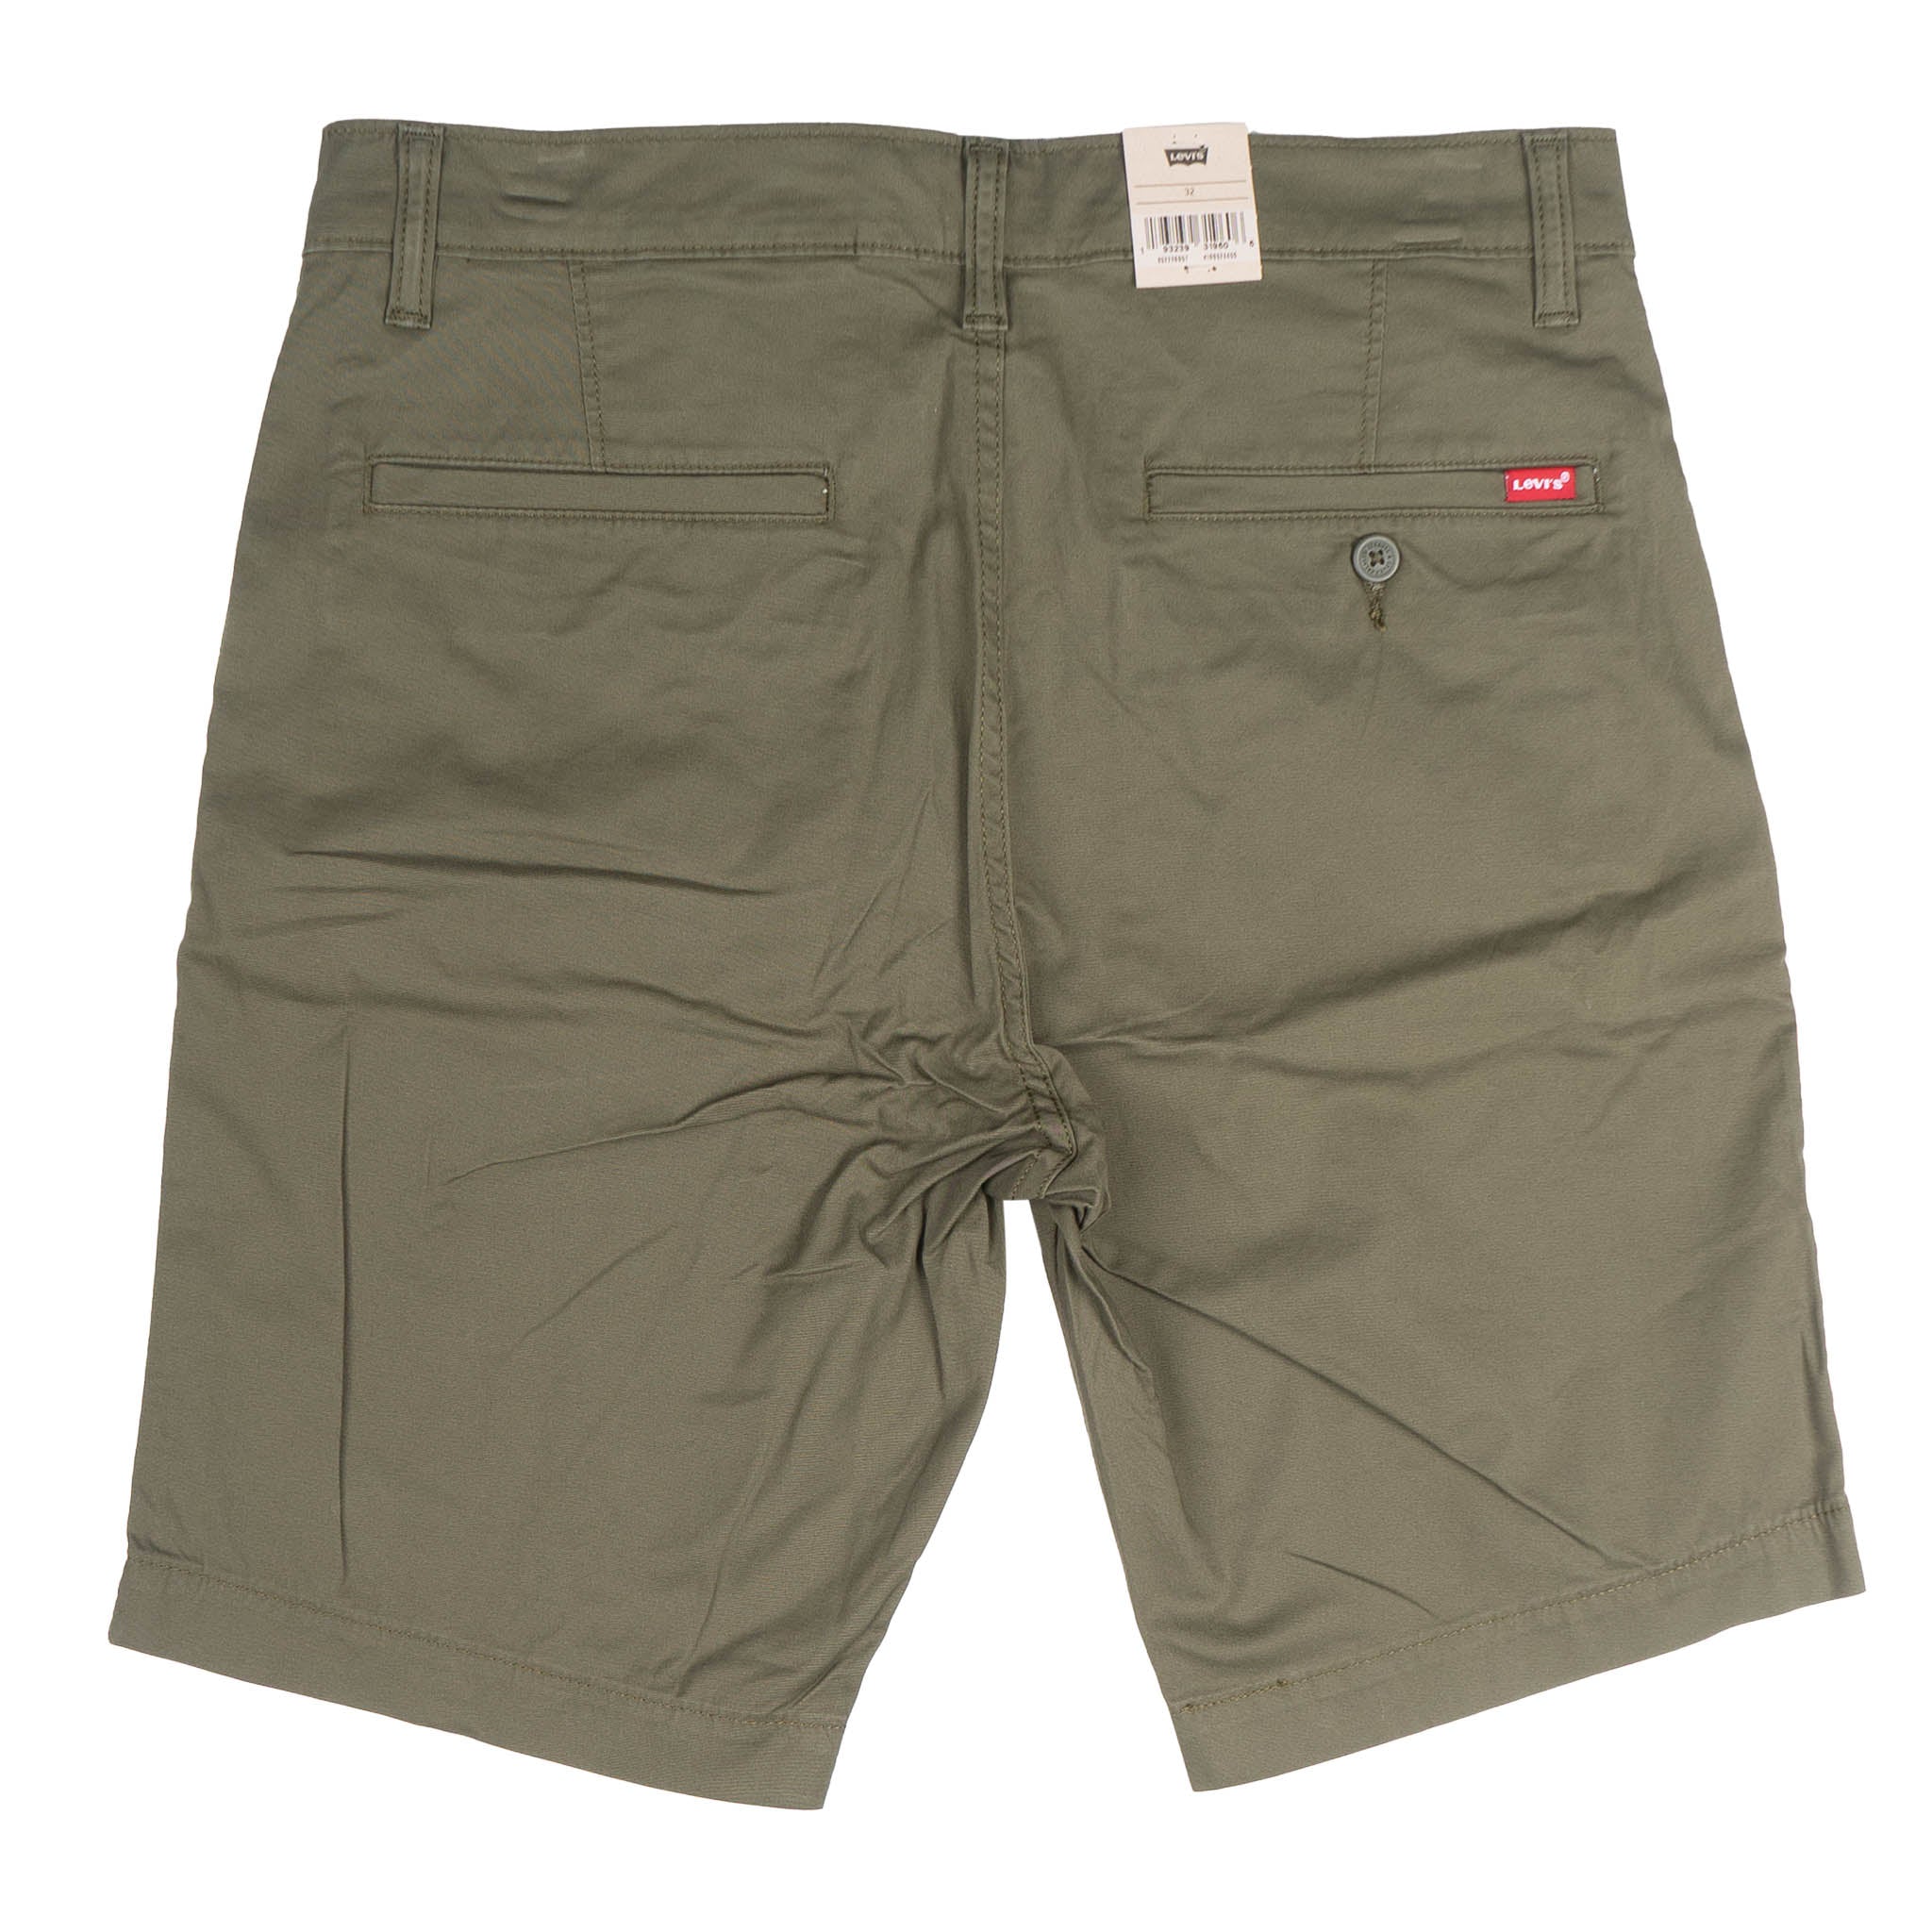 LEVIS CHINO SHORTS ASSORTED - LCHNS04